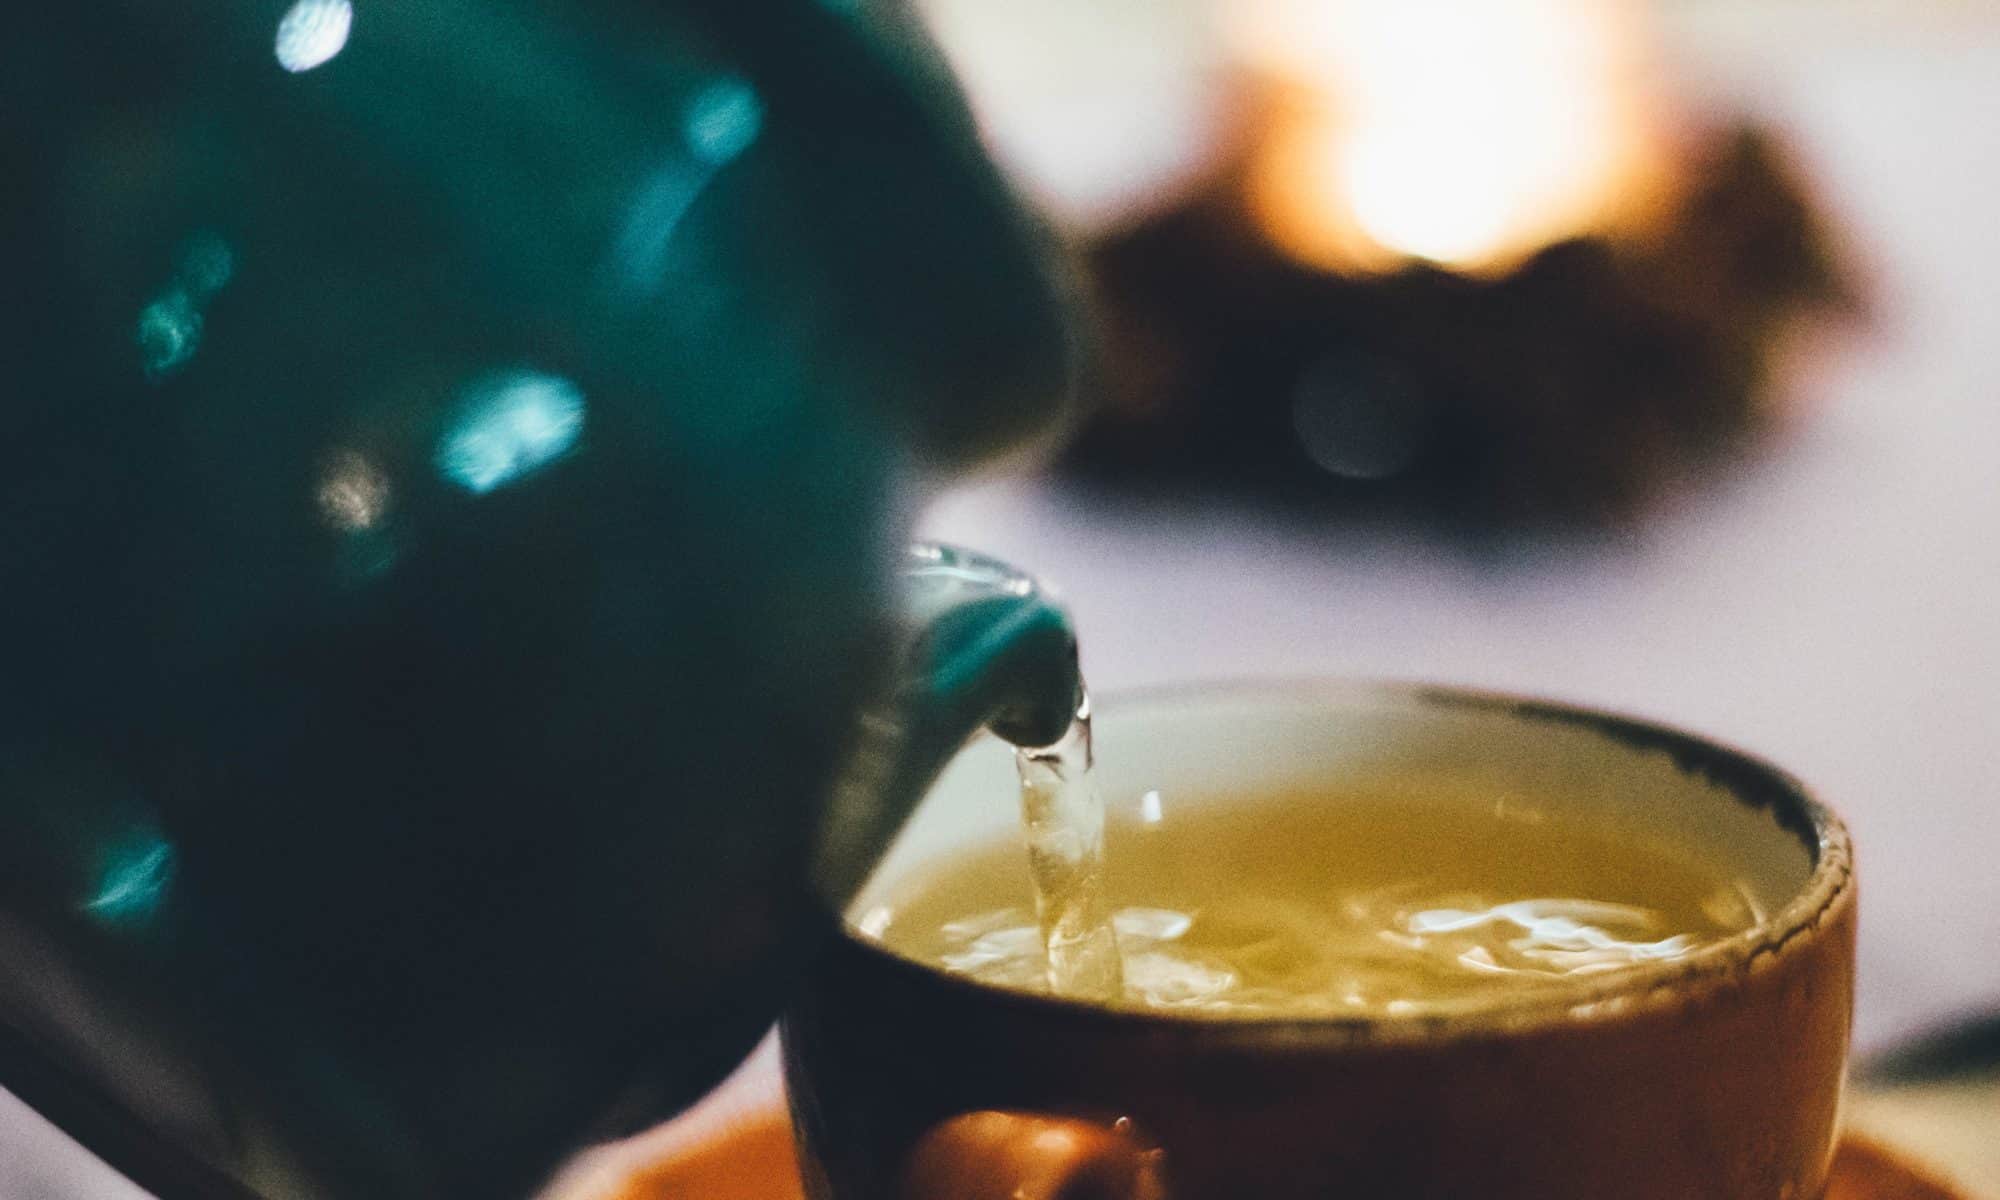 Photo by Maria Tyutina: https://www.pexels.com/photo/person-pouring-liquid-into-brown-ceramic-cup-814264/